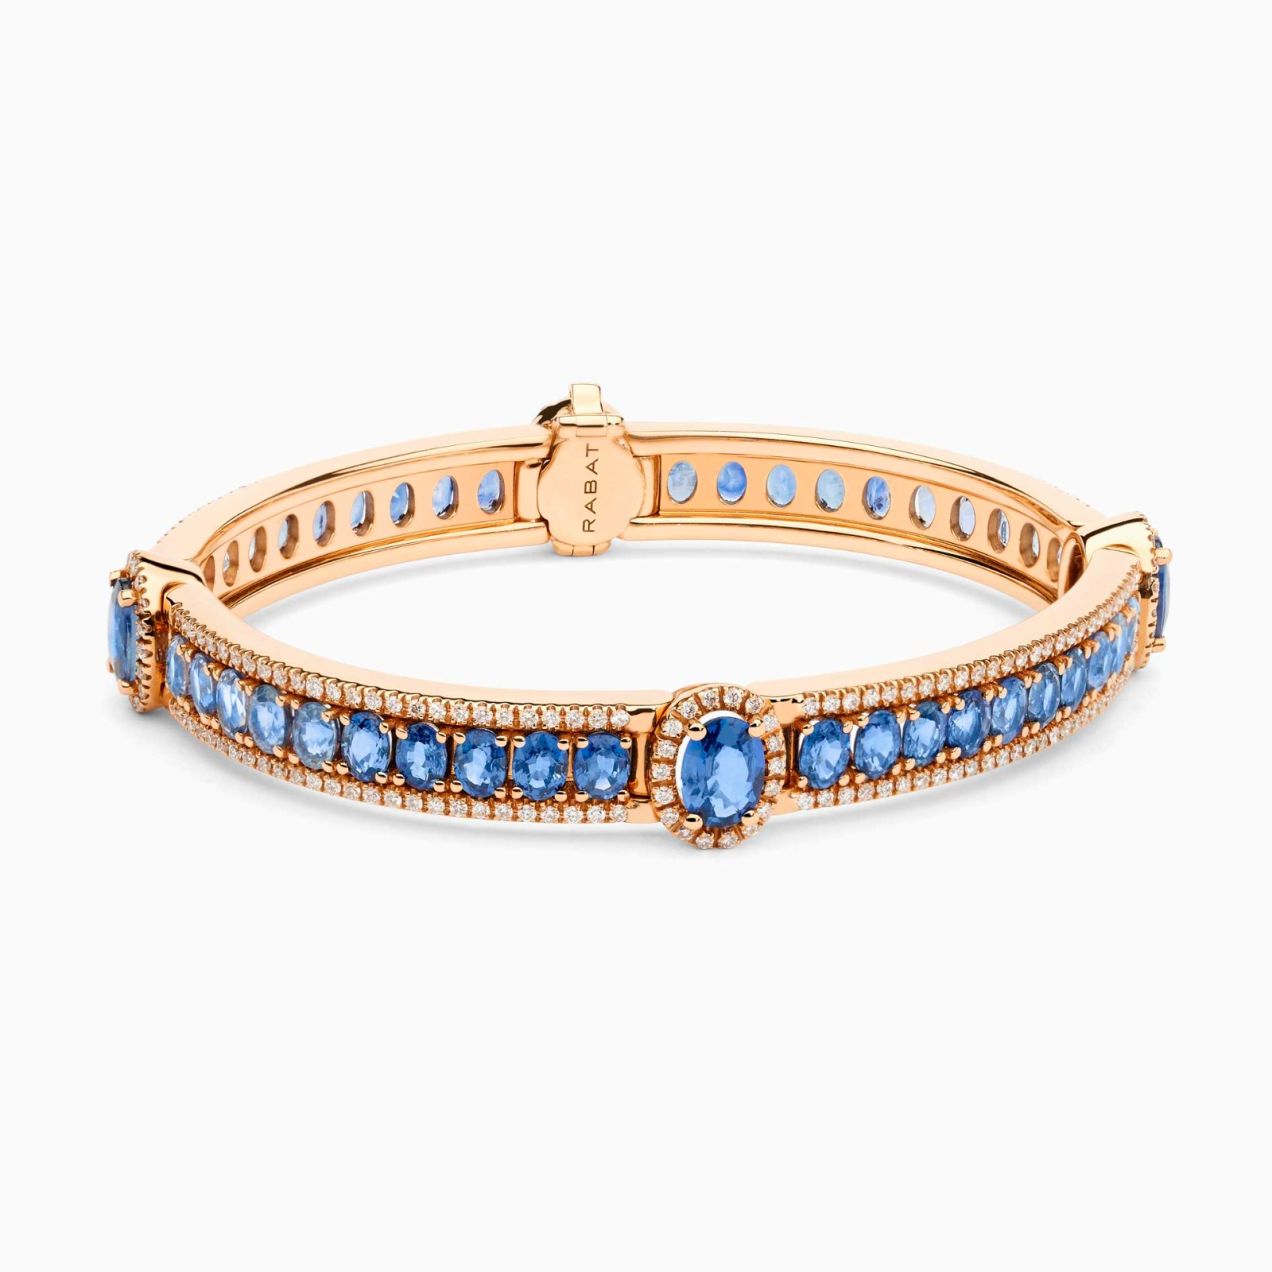 Rose gold cuff bracelet with blue sapphires